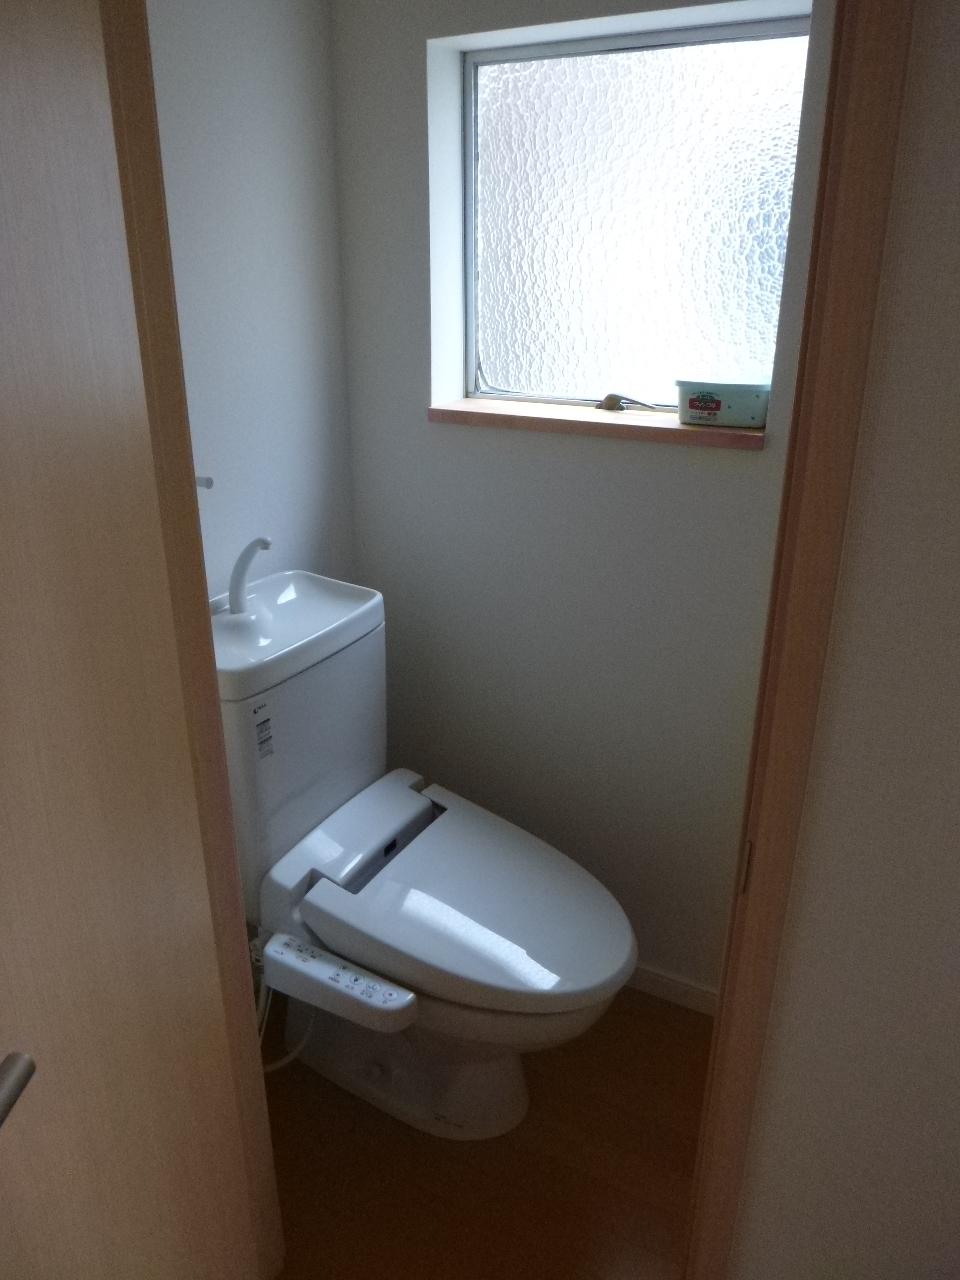 Toilet.  ■ There is a window in the toilet